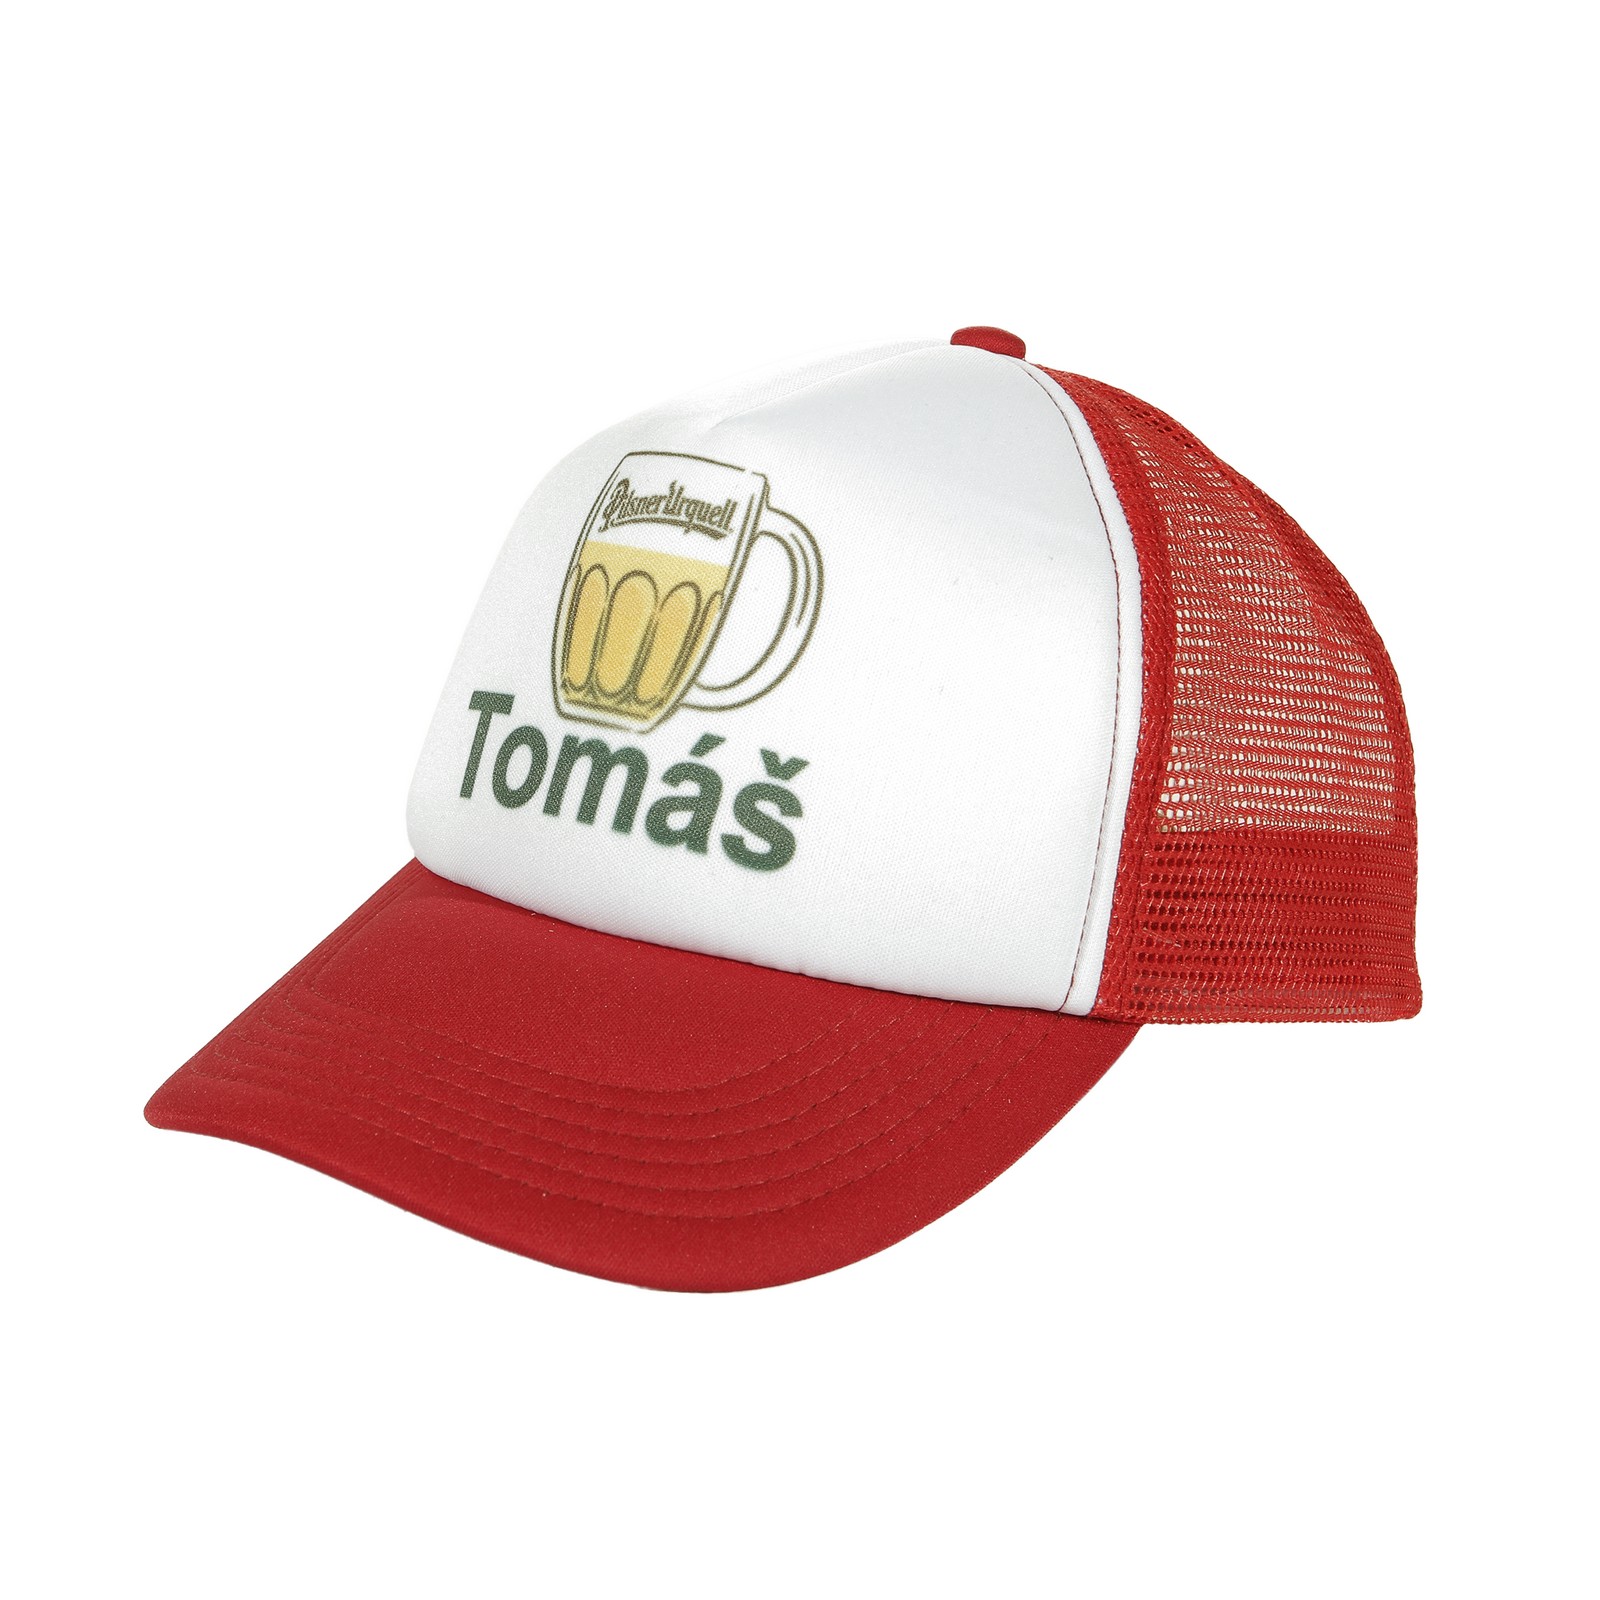 Red cap with own design